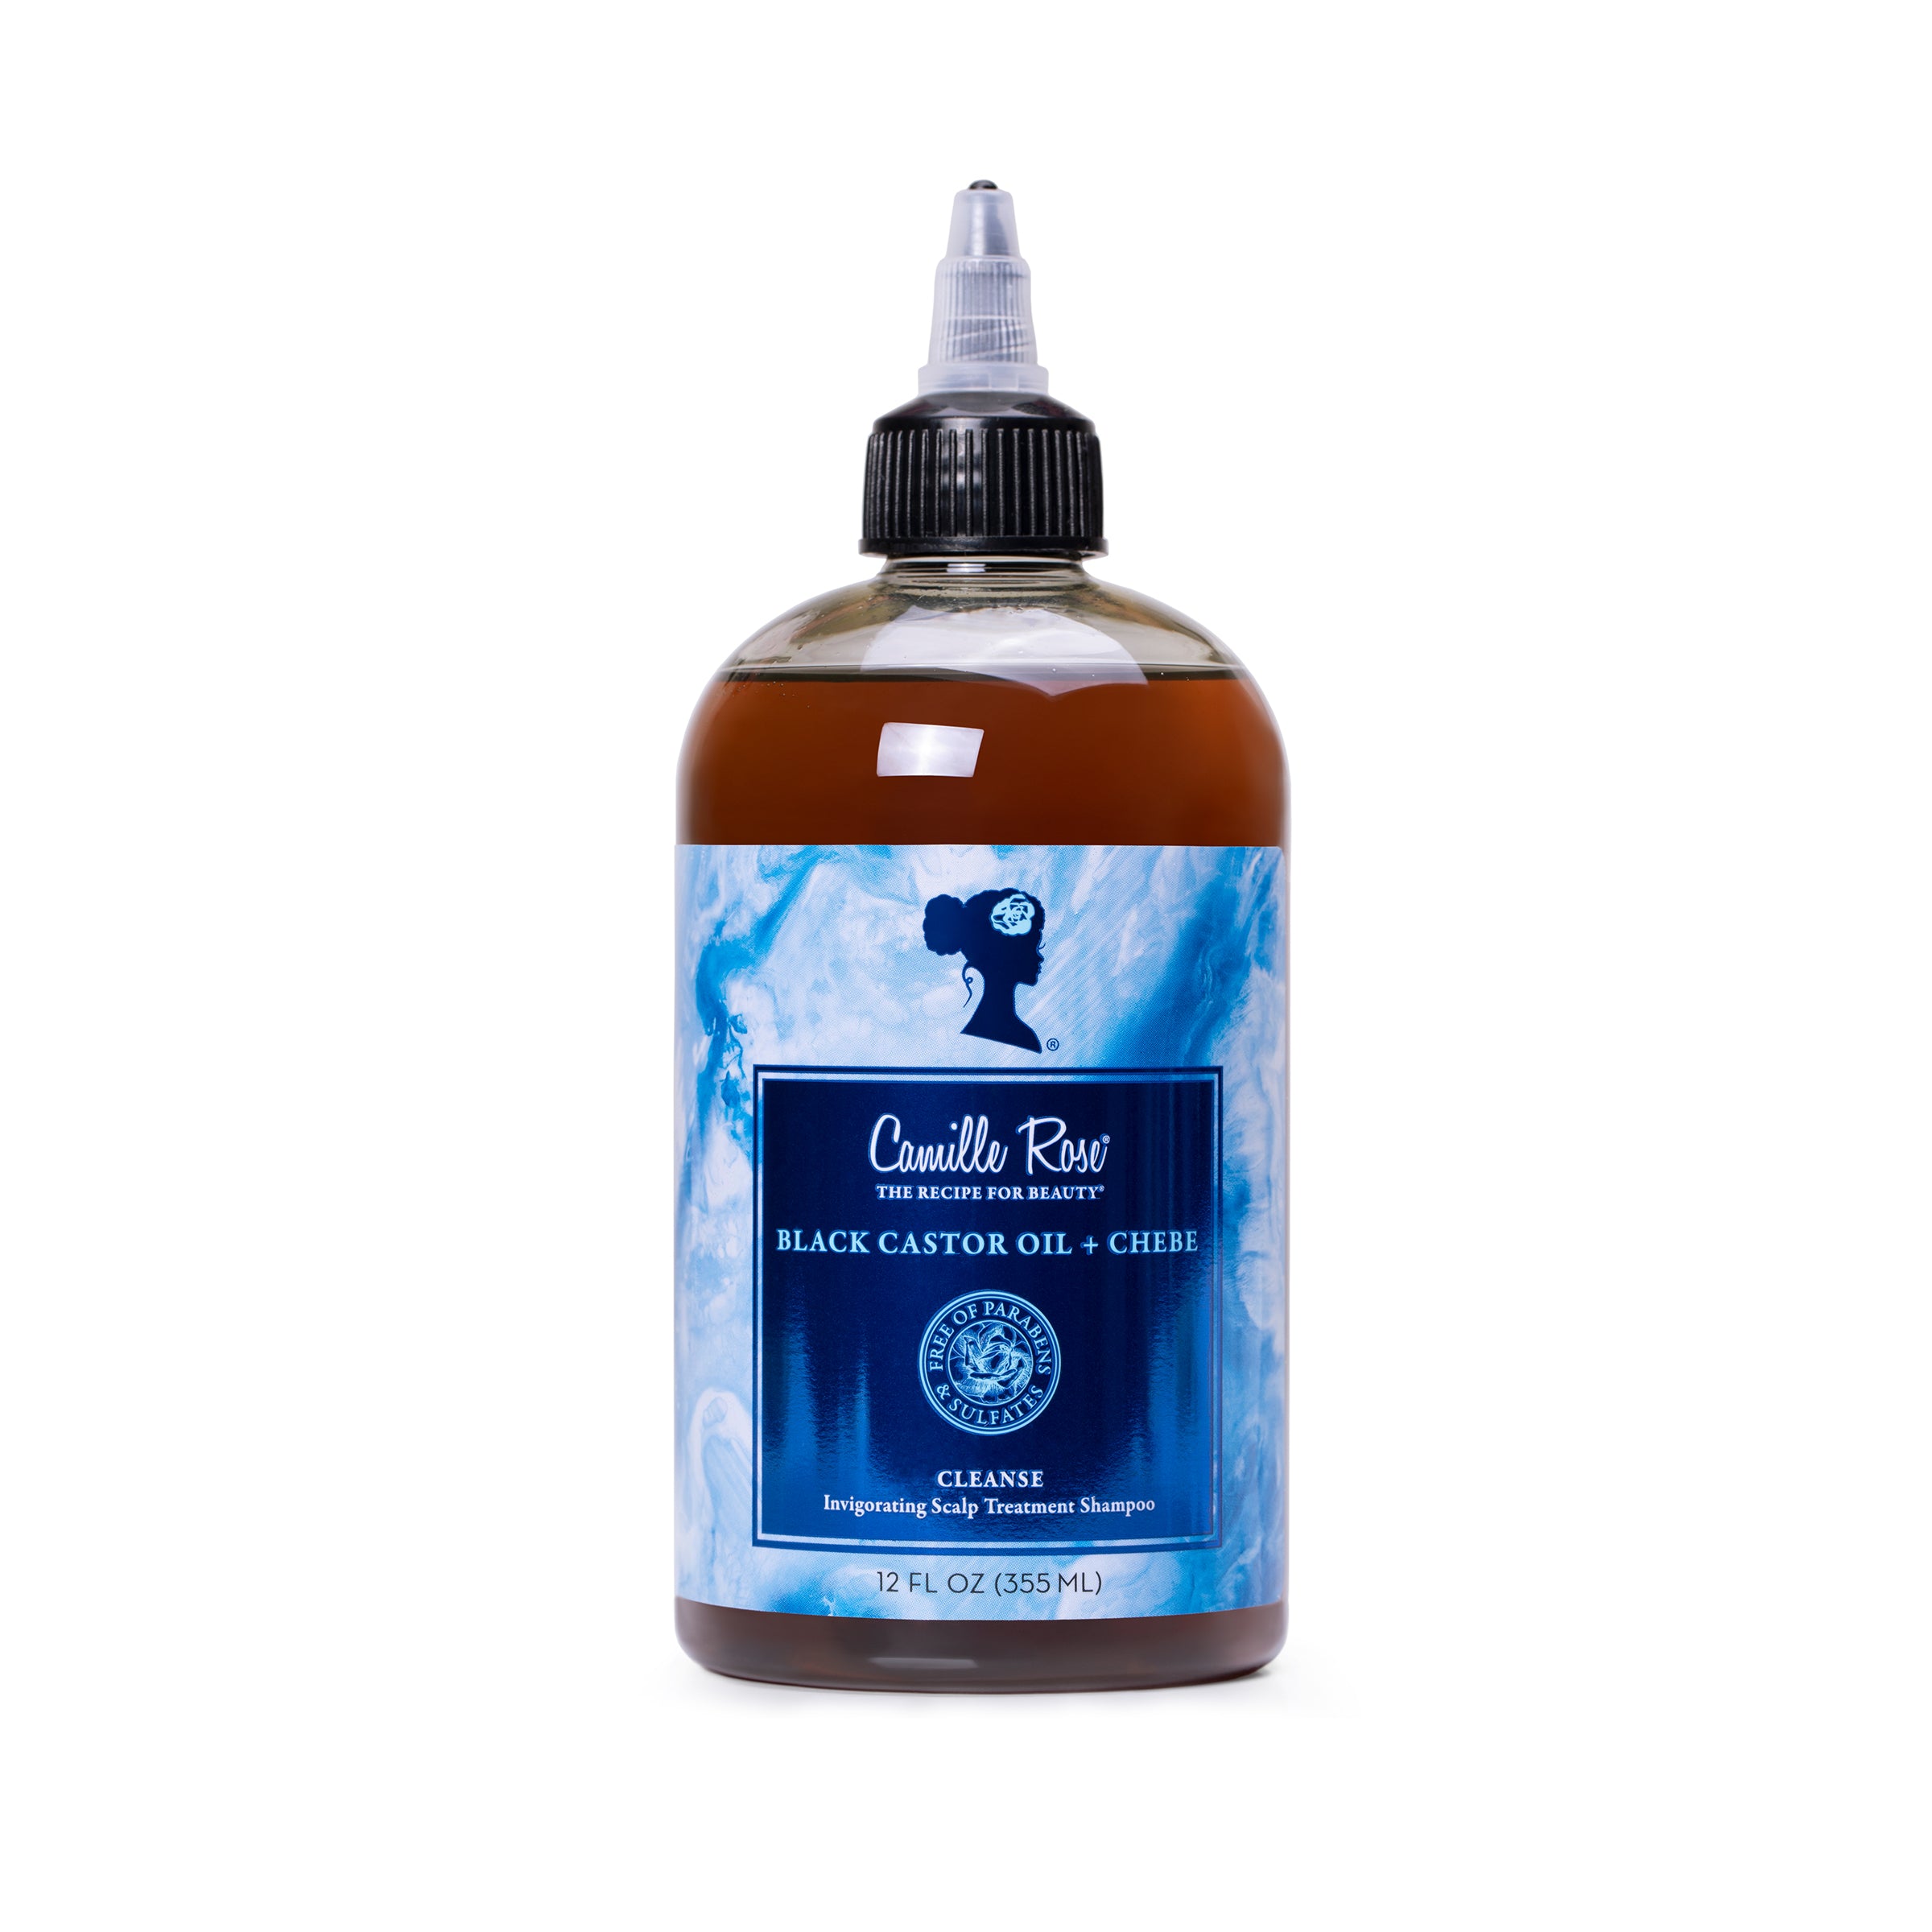 CAMILLE ROSE BLACK CASTOR OIL + CHEBE CLEANSE SHAMPOO